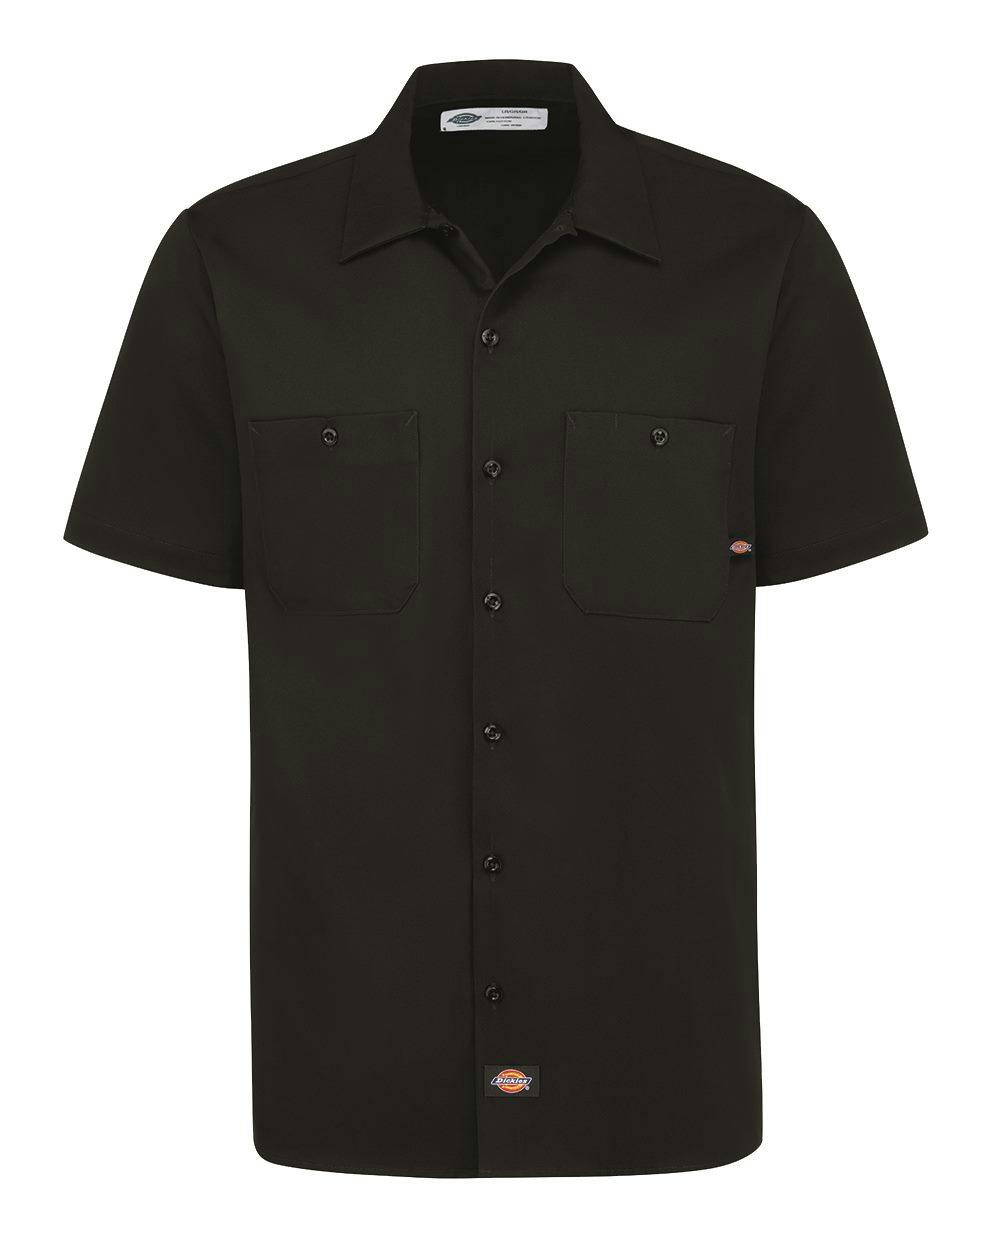 Image for Industrial Short Sleeve Cotton Work Shirt - S307